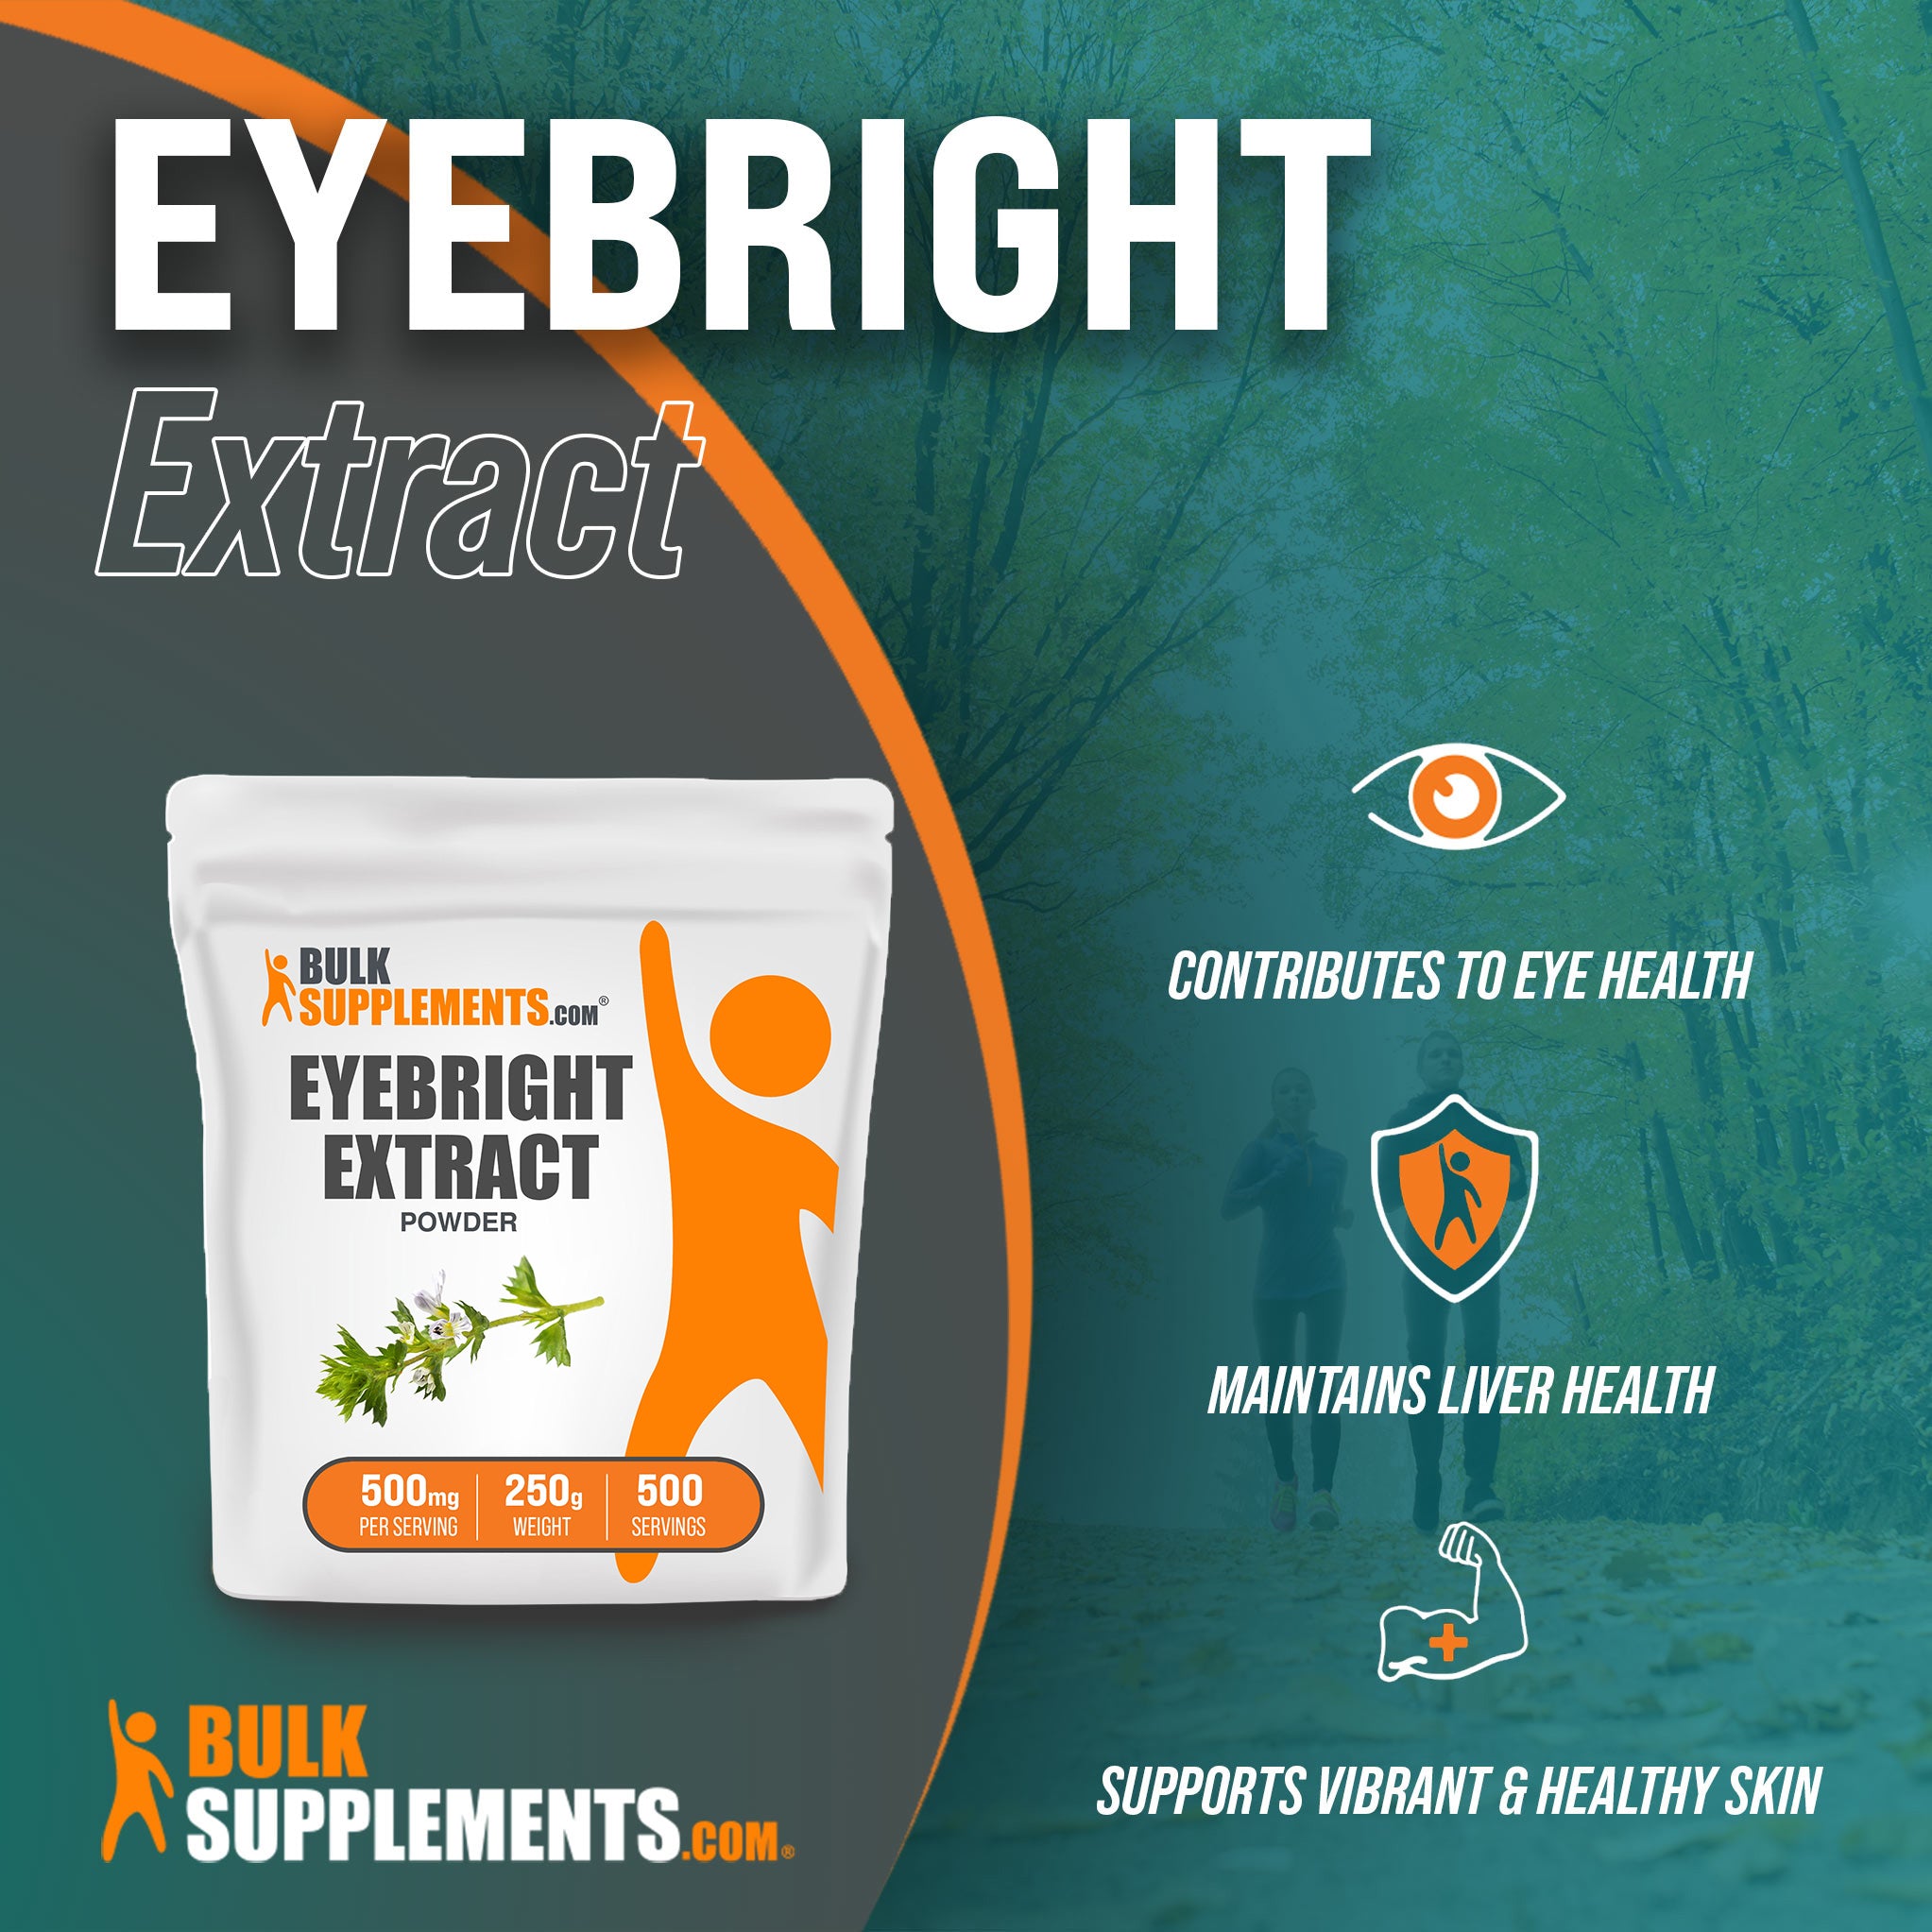 Benefits of Eyebright Extract; contributes to eye health, maintains liver health, supports vibrant and healthy skin